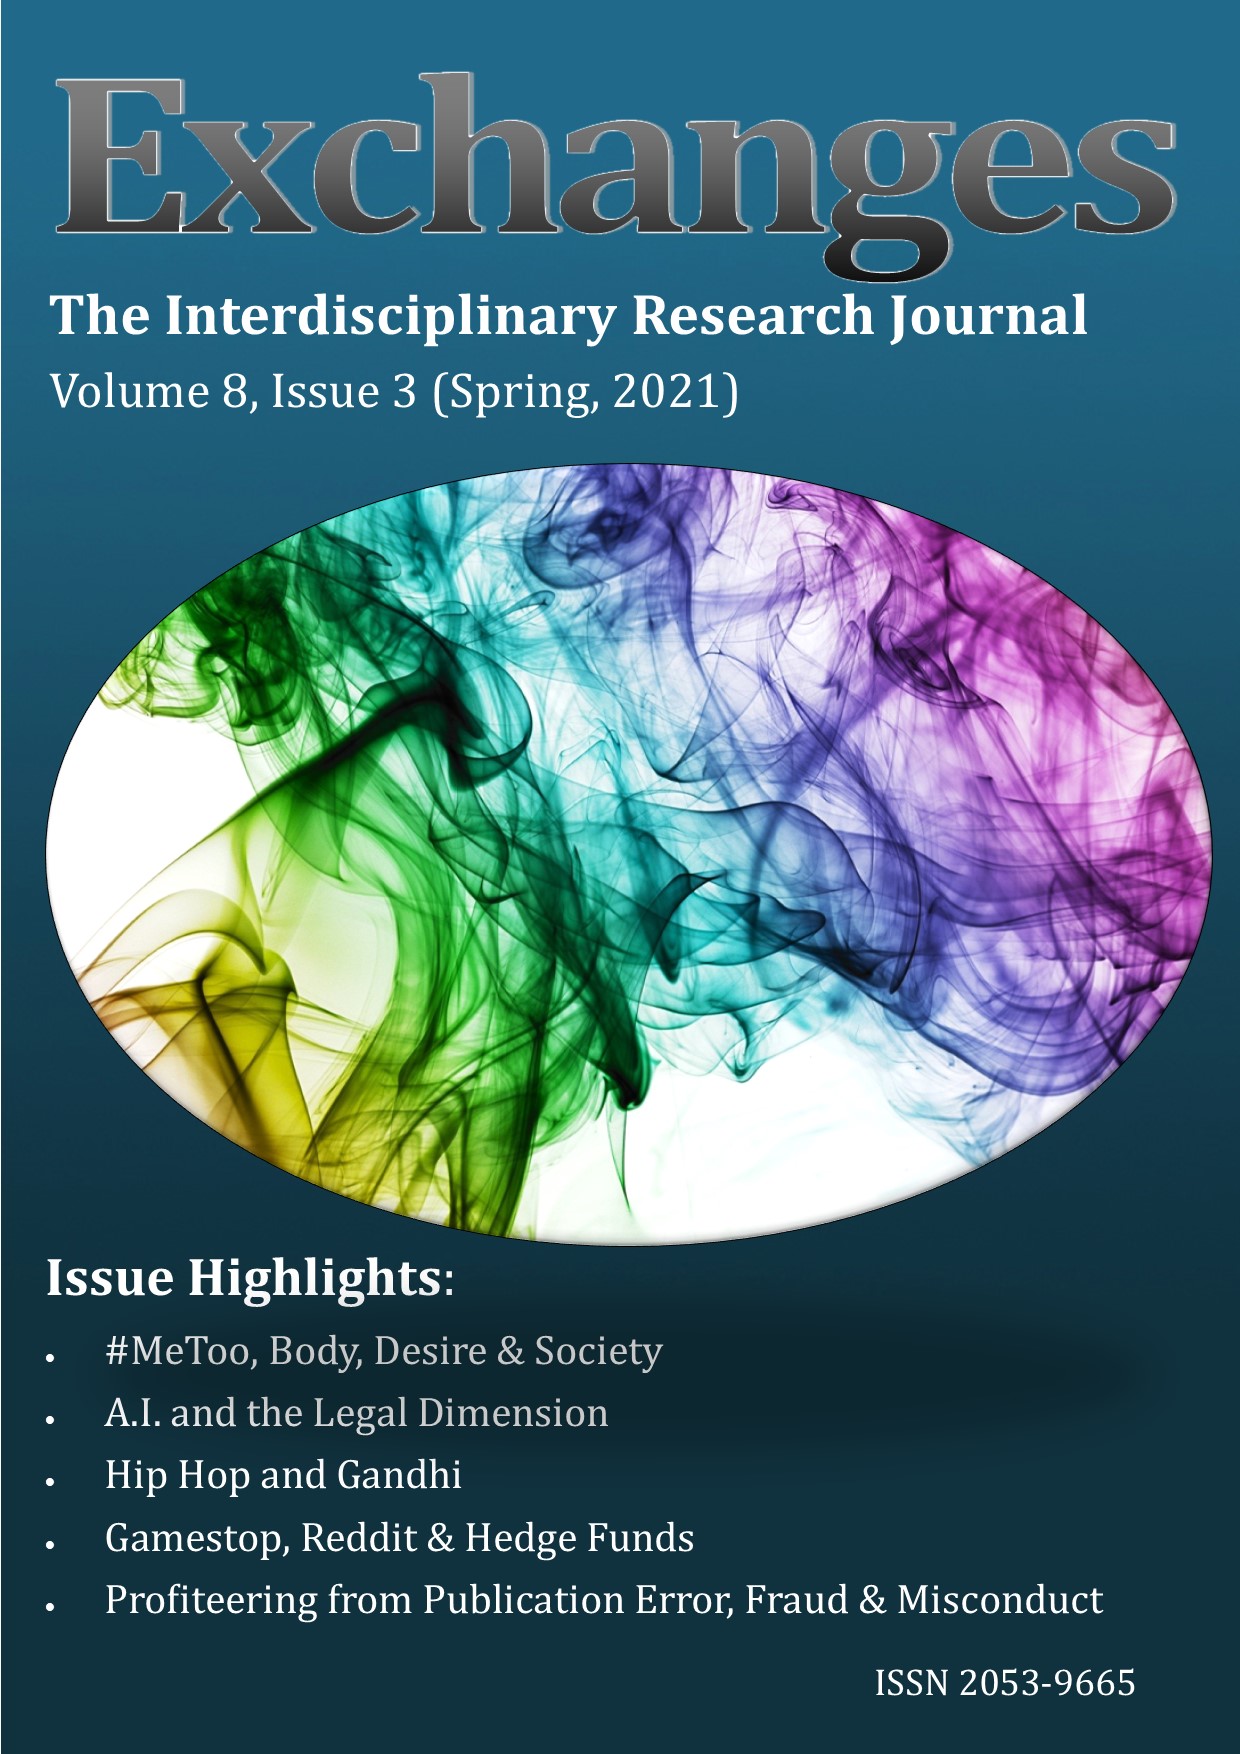 Cover of issue 8.3, including text about the article highlights